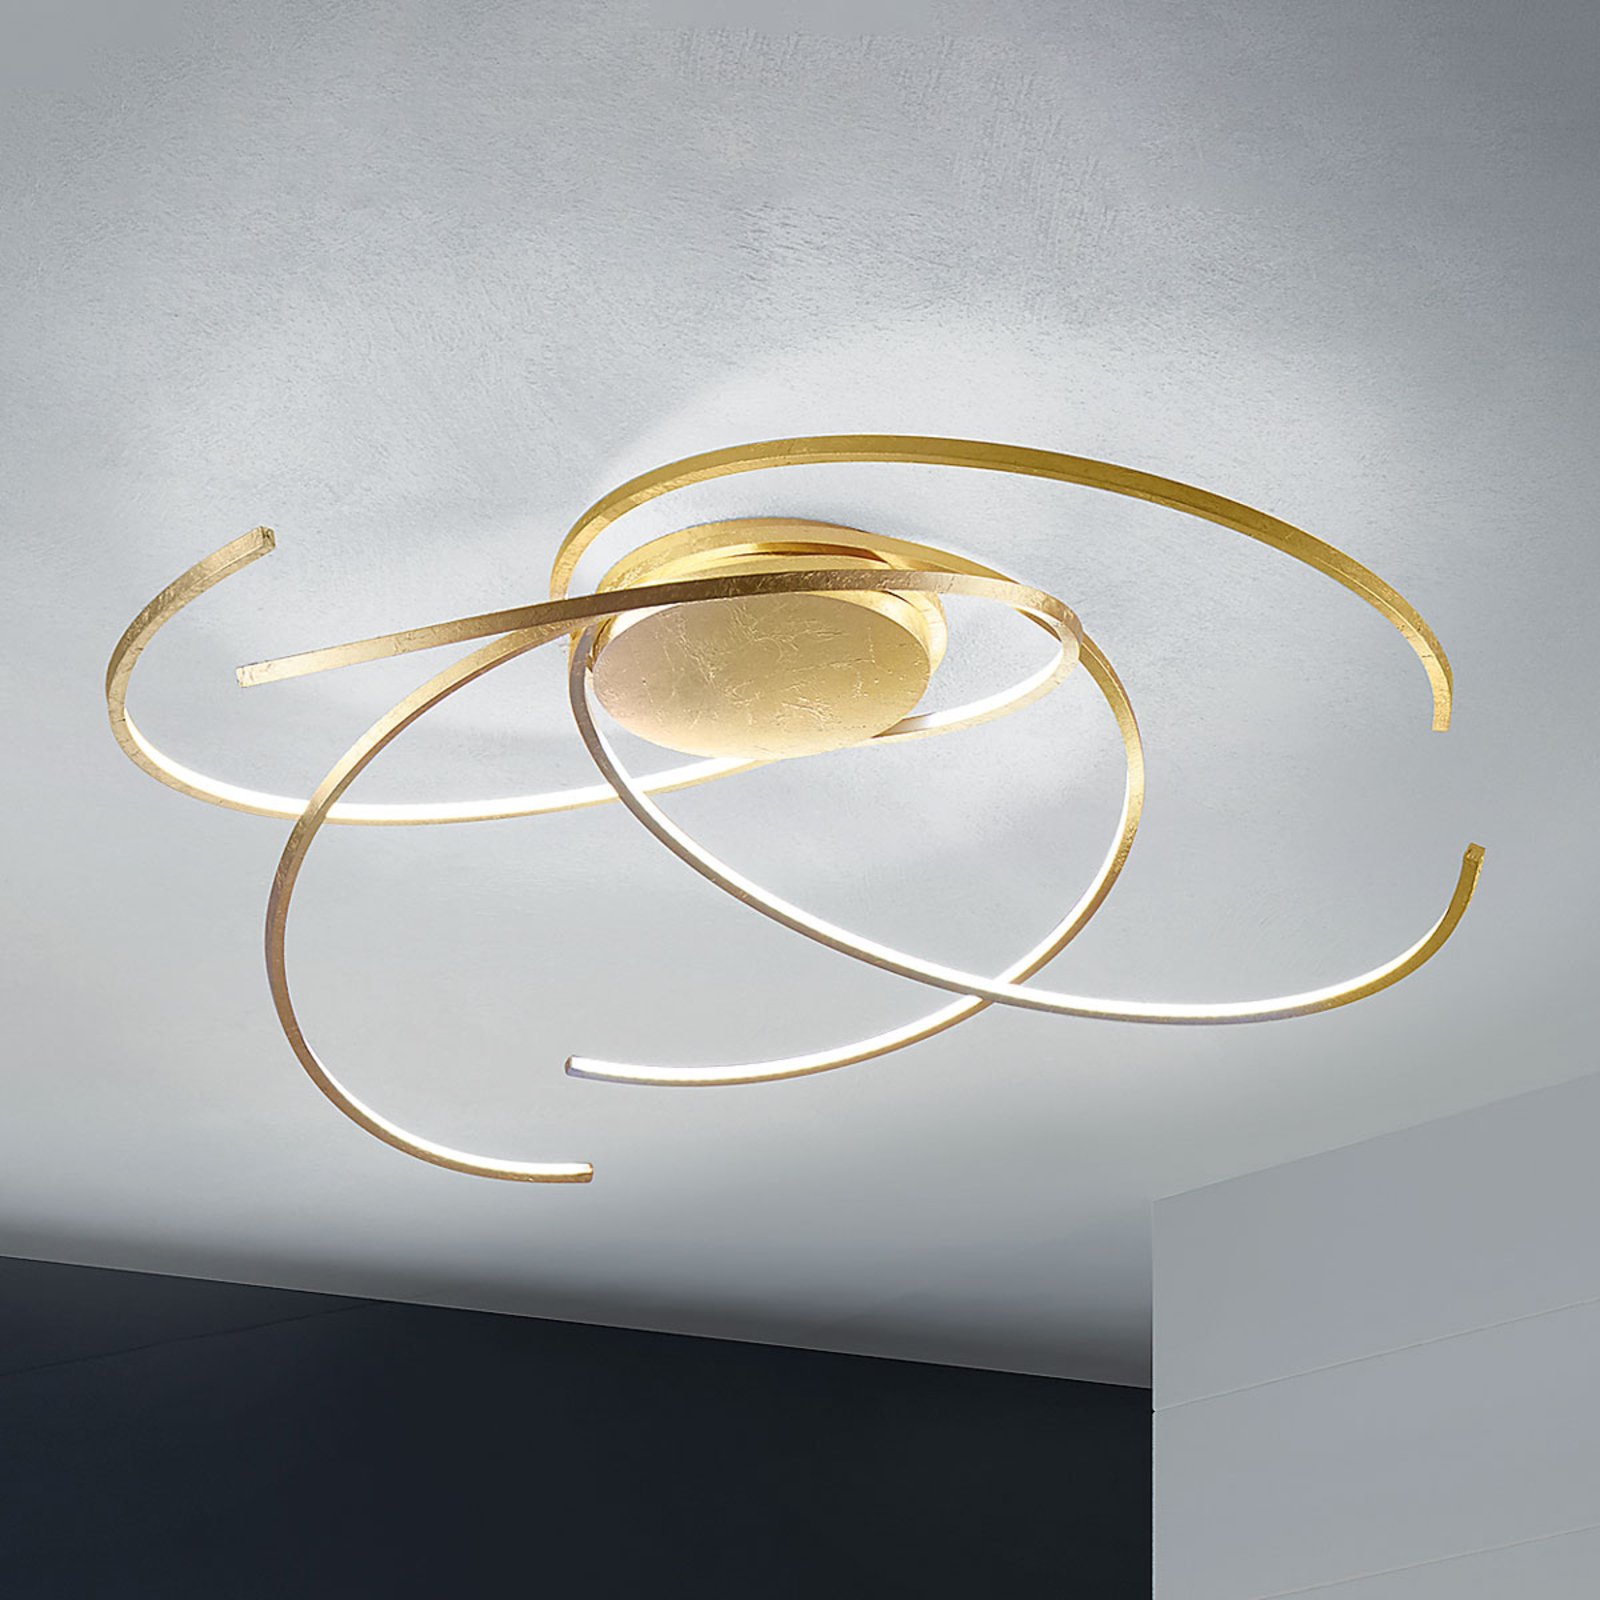 Escale Space - LED-taklampa, 80 cm, bladguld